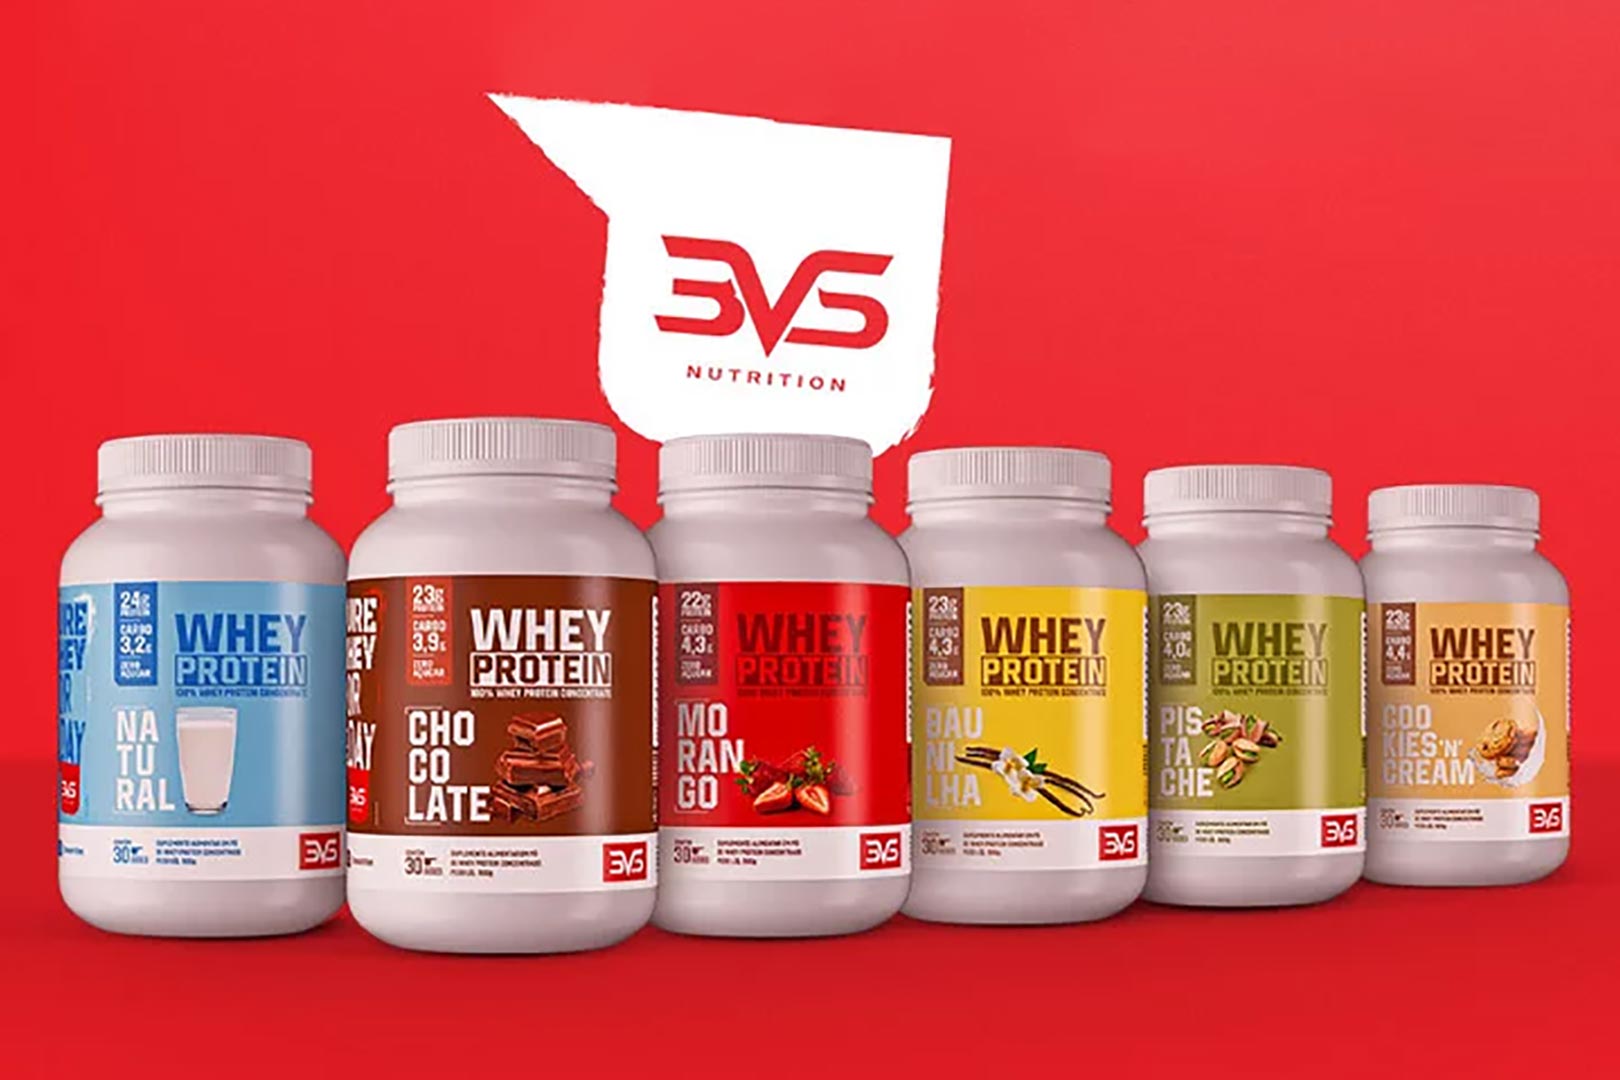 3vs Nutrition Whey Protein